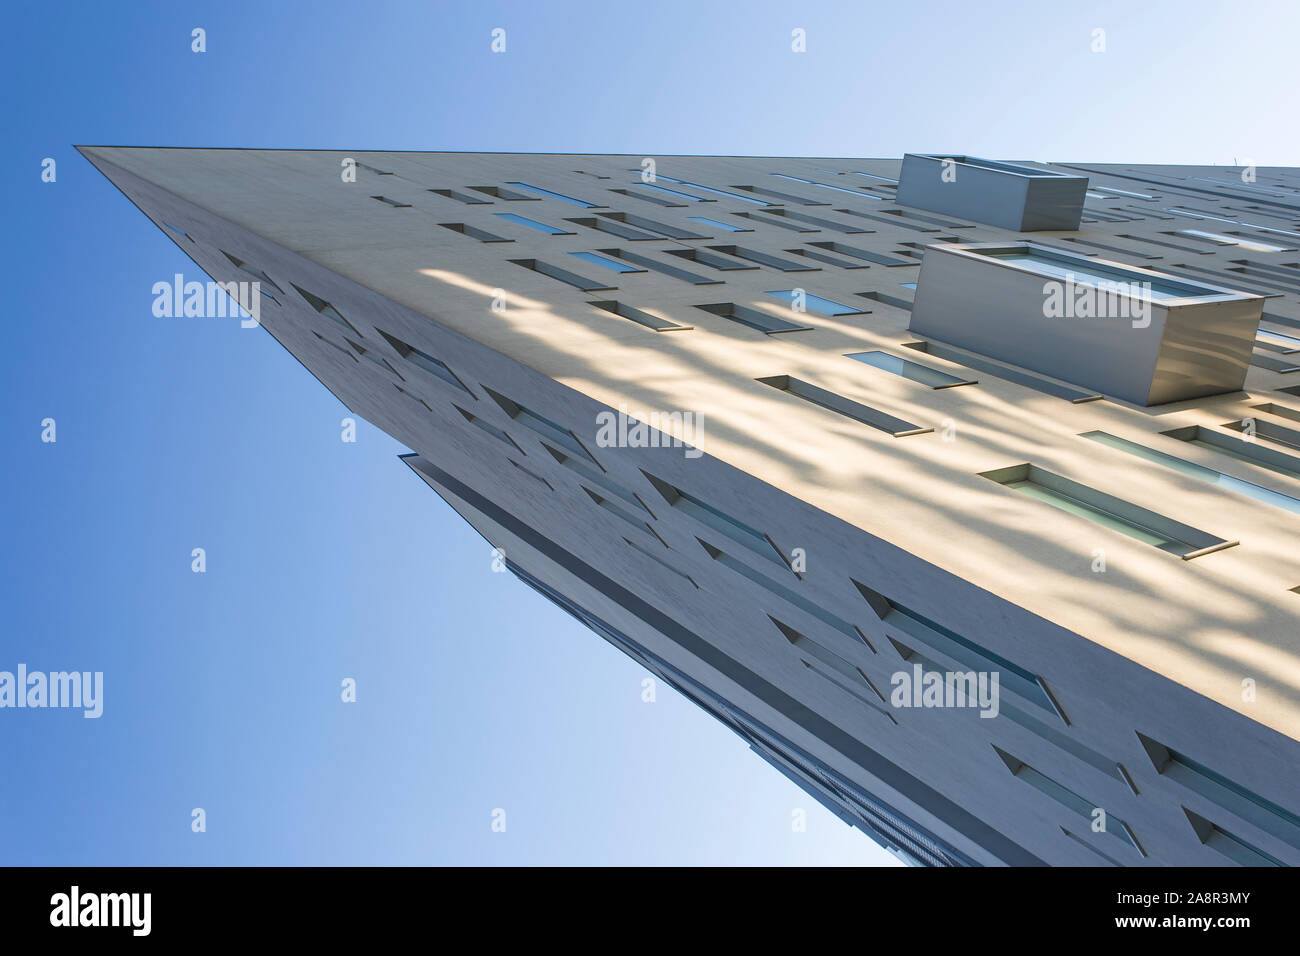 Office building facade in Assago (Milano, Italy), no people are visible; background is a blue daylight sky Stock Photo